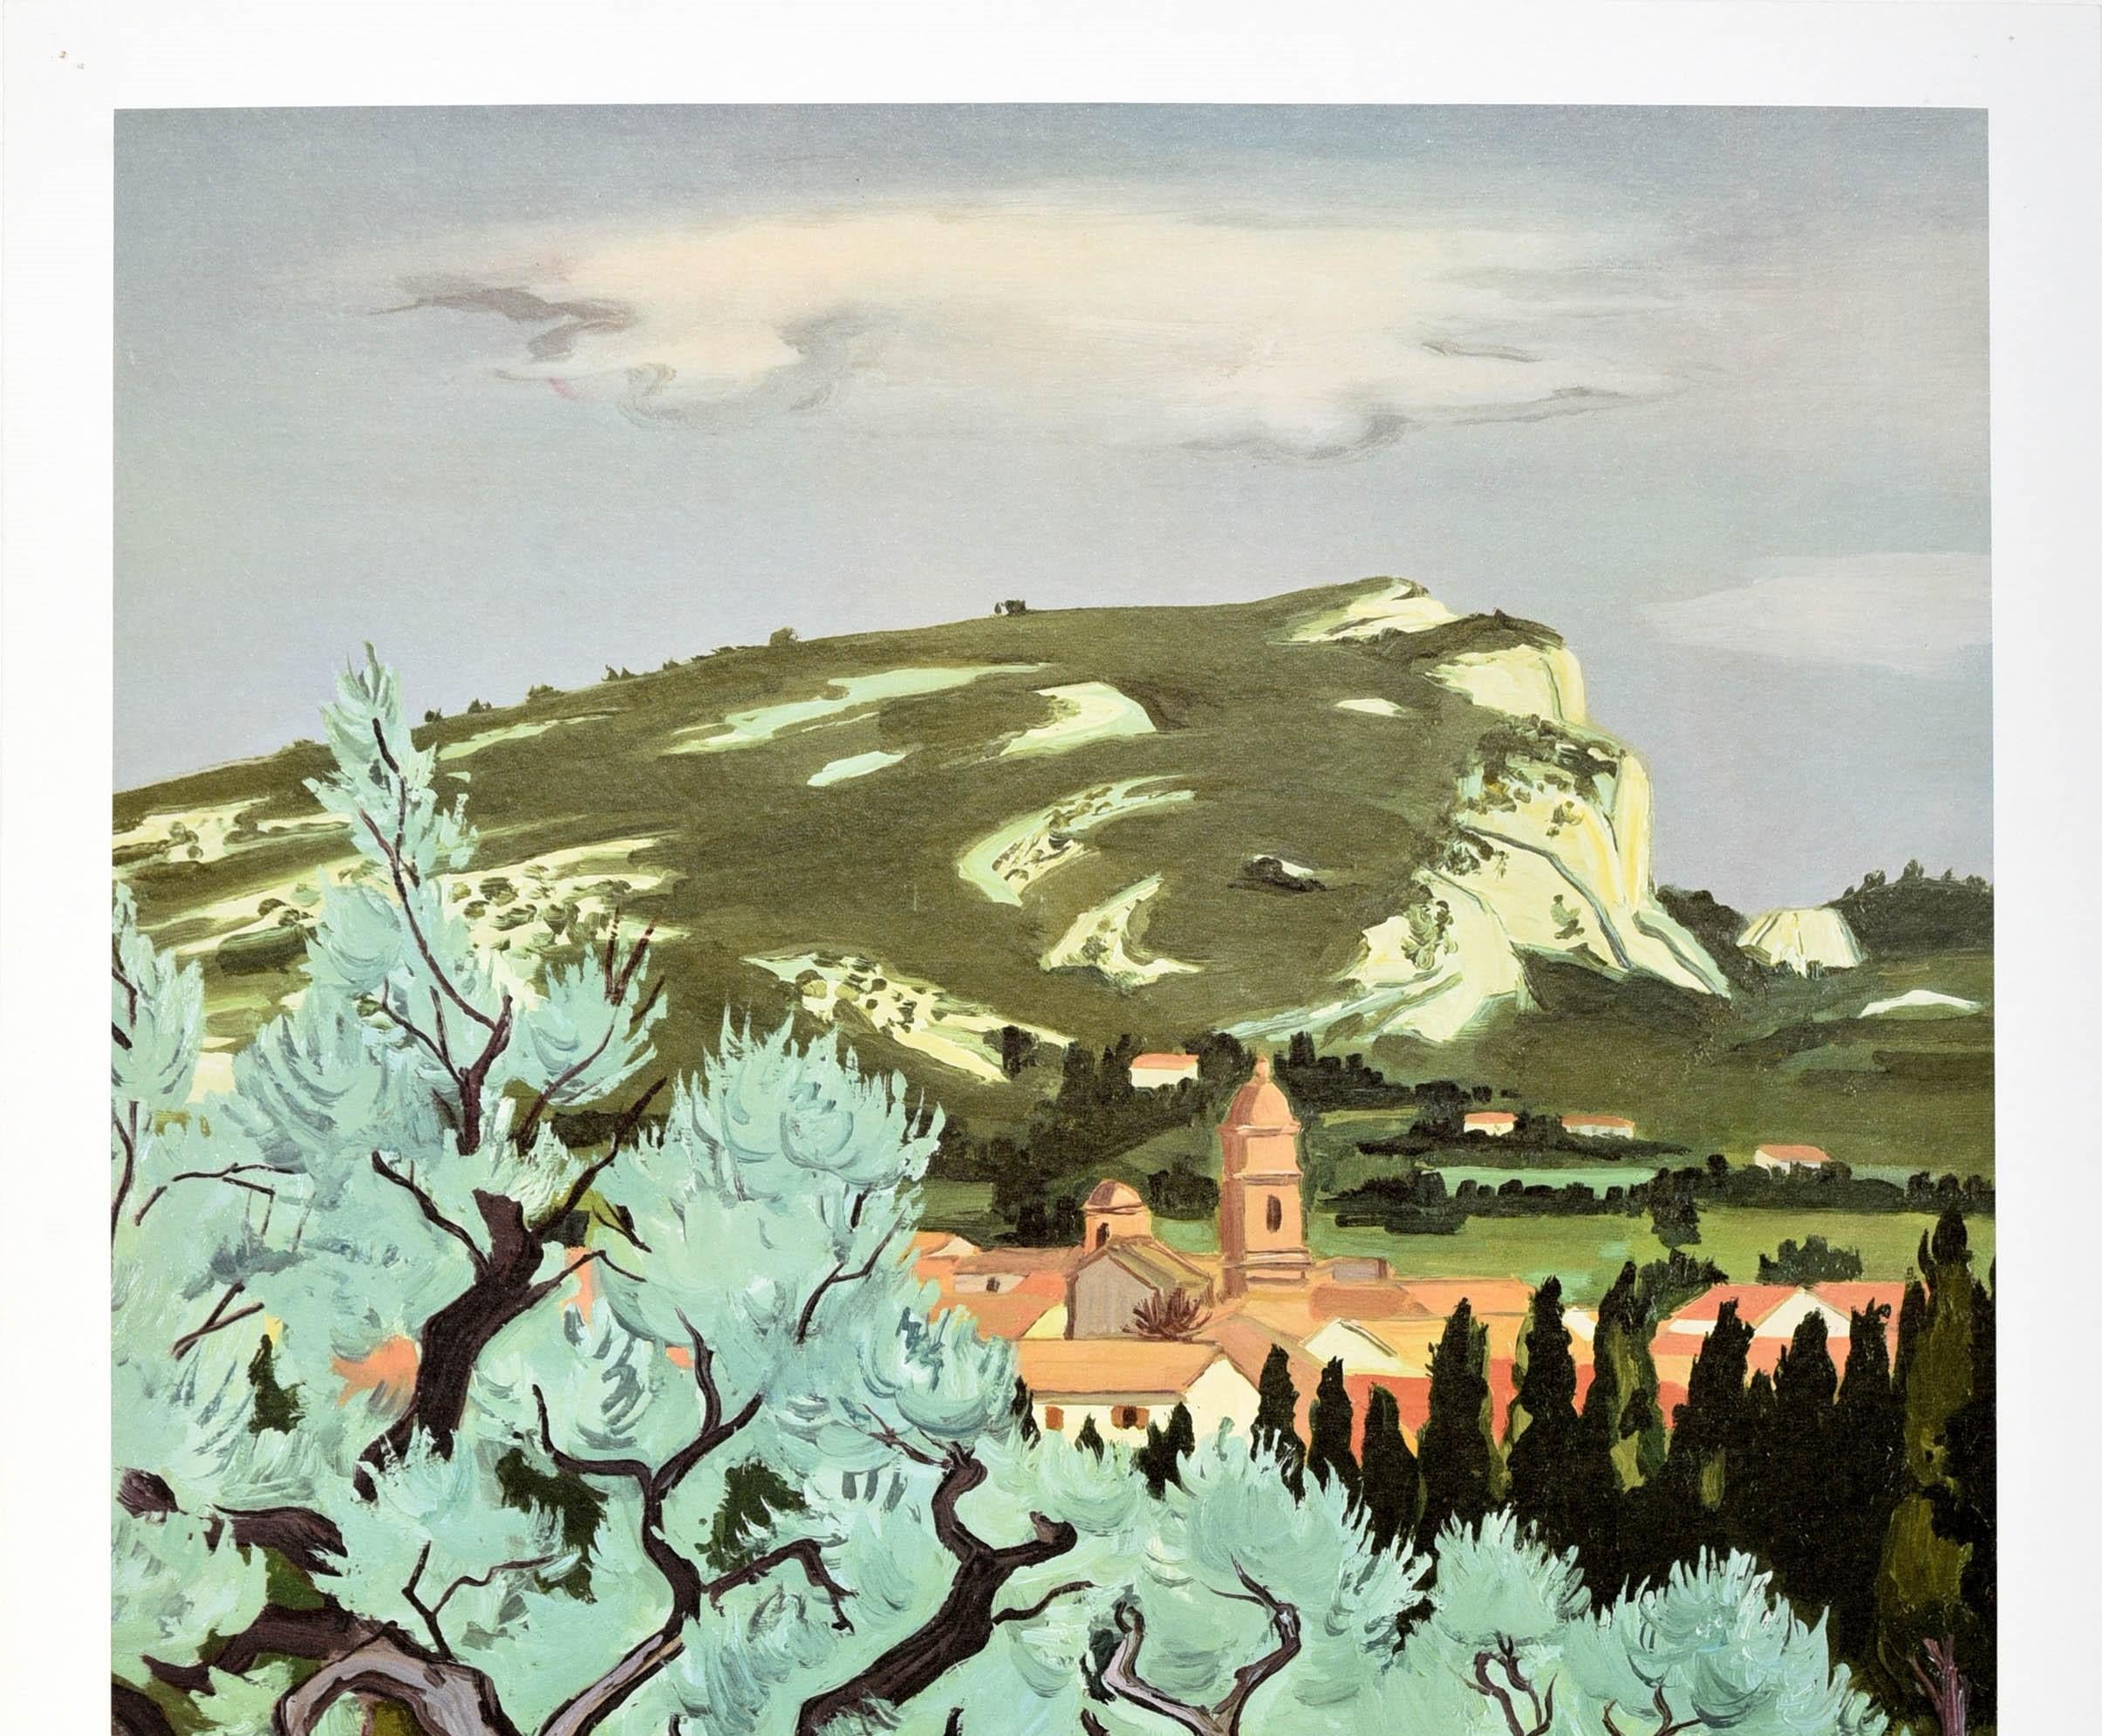 Original vintage travel poster for Provence by Yves Brayer (1907-1990) Discover France by Train French National Railroads featuring a scenic painting of the countryside showing trees by a rocky path in the foreground leading to a village with hills